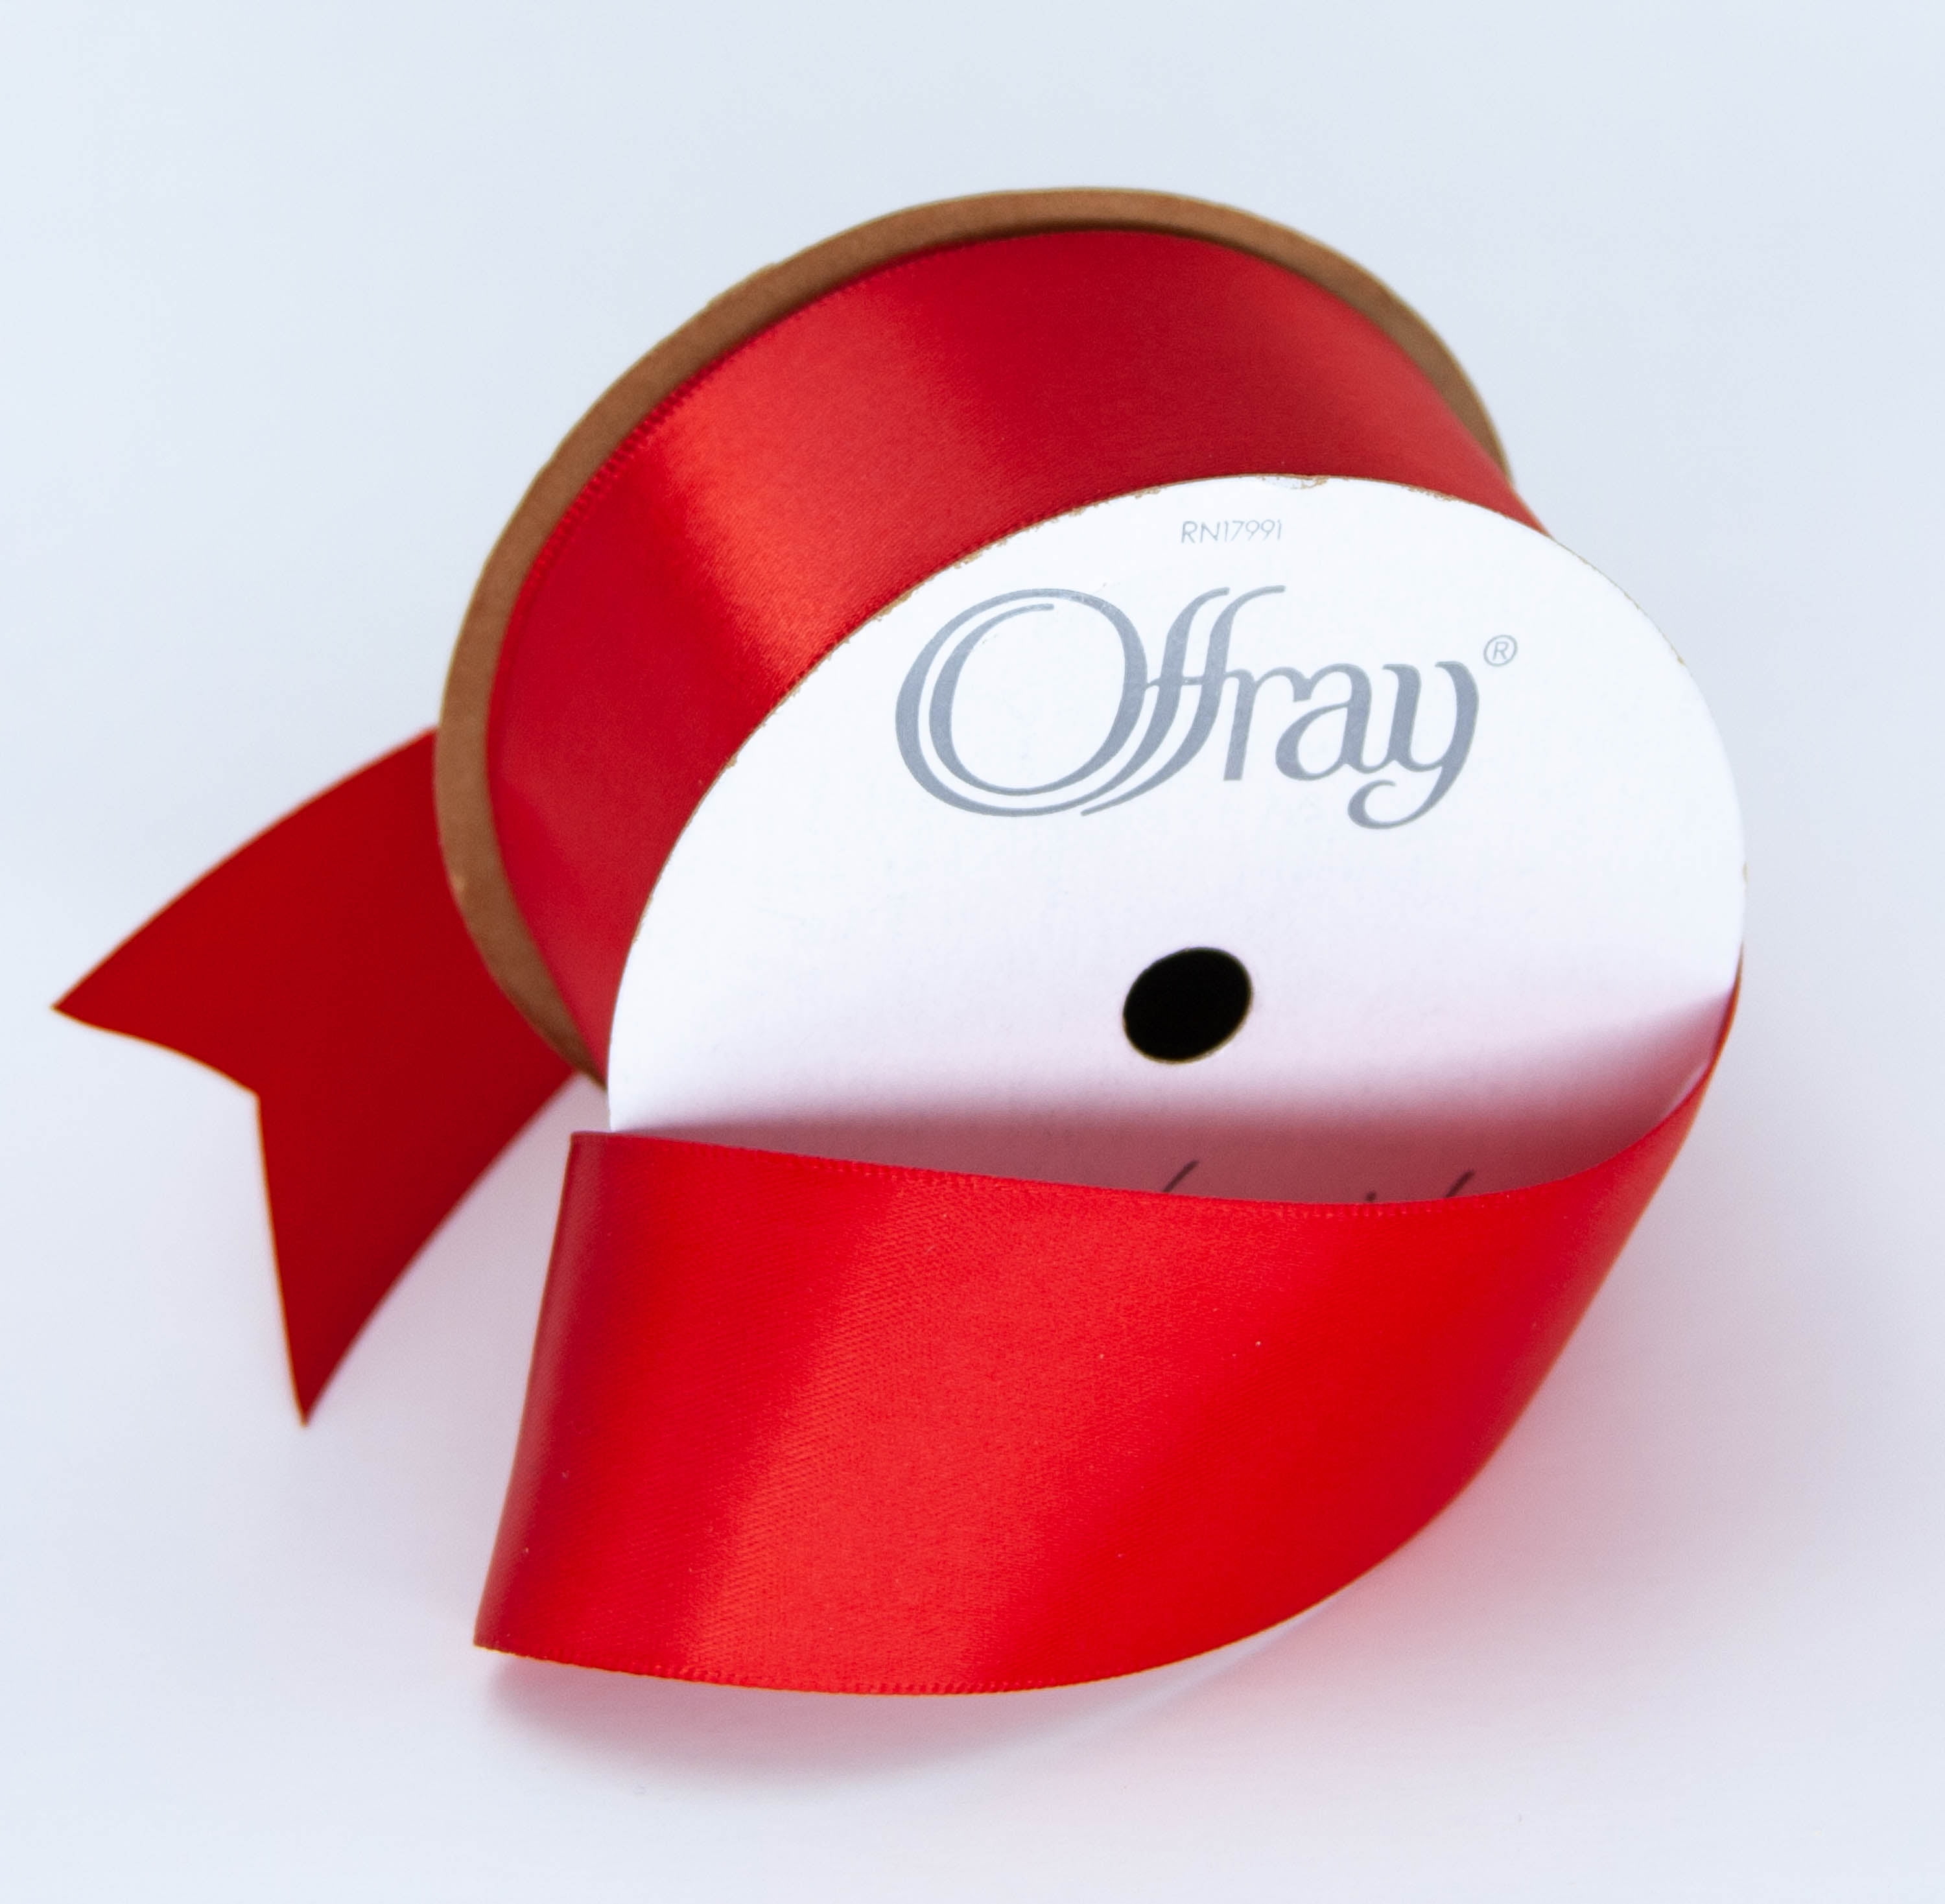 Offray Ribbon, Red 1 1/2 inch Double Face Satin Polyester Ribbon, 12 feet 